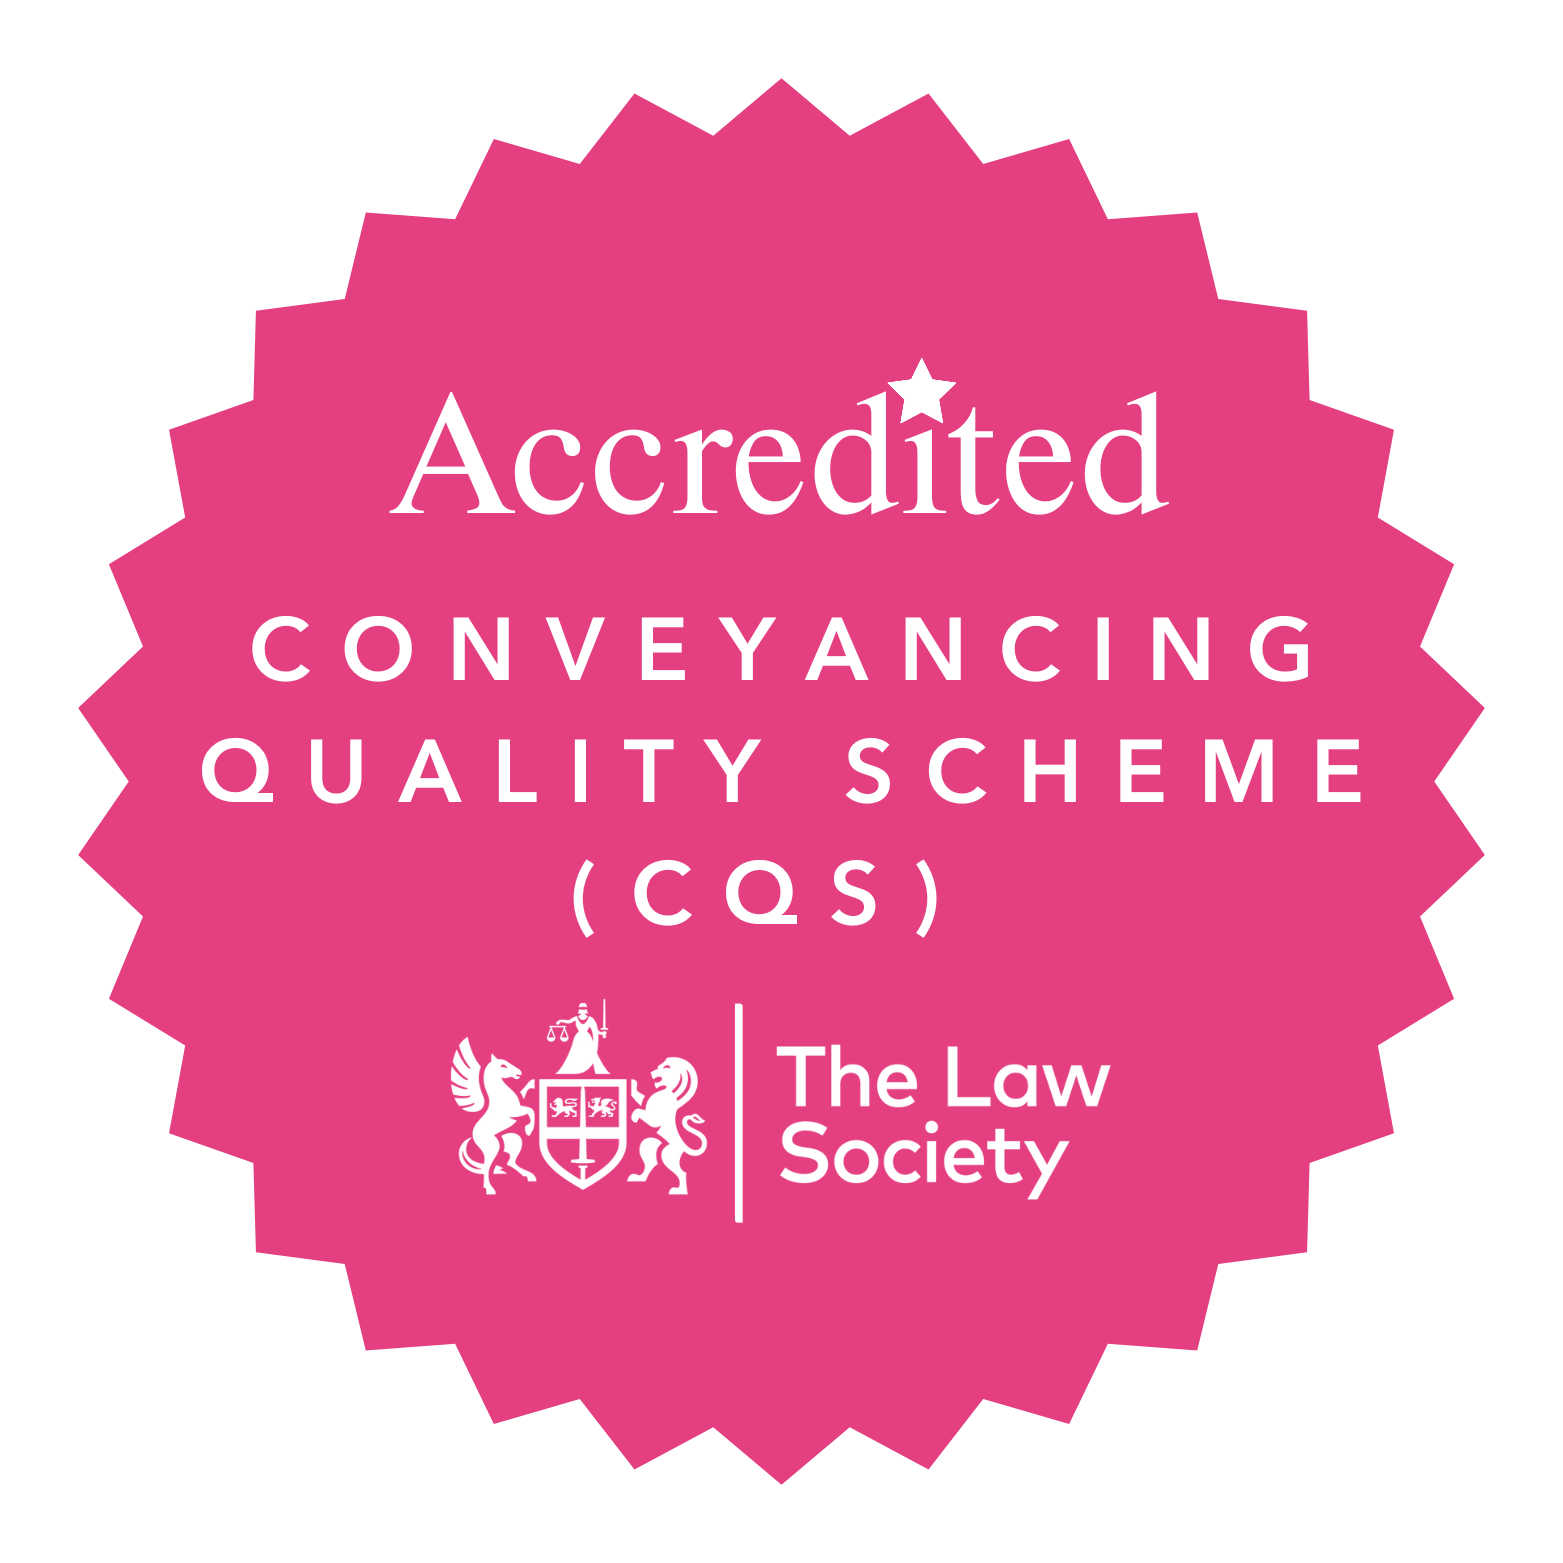 Accredited conveyancing quality scheme (CQS)